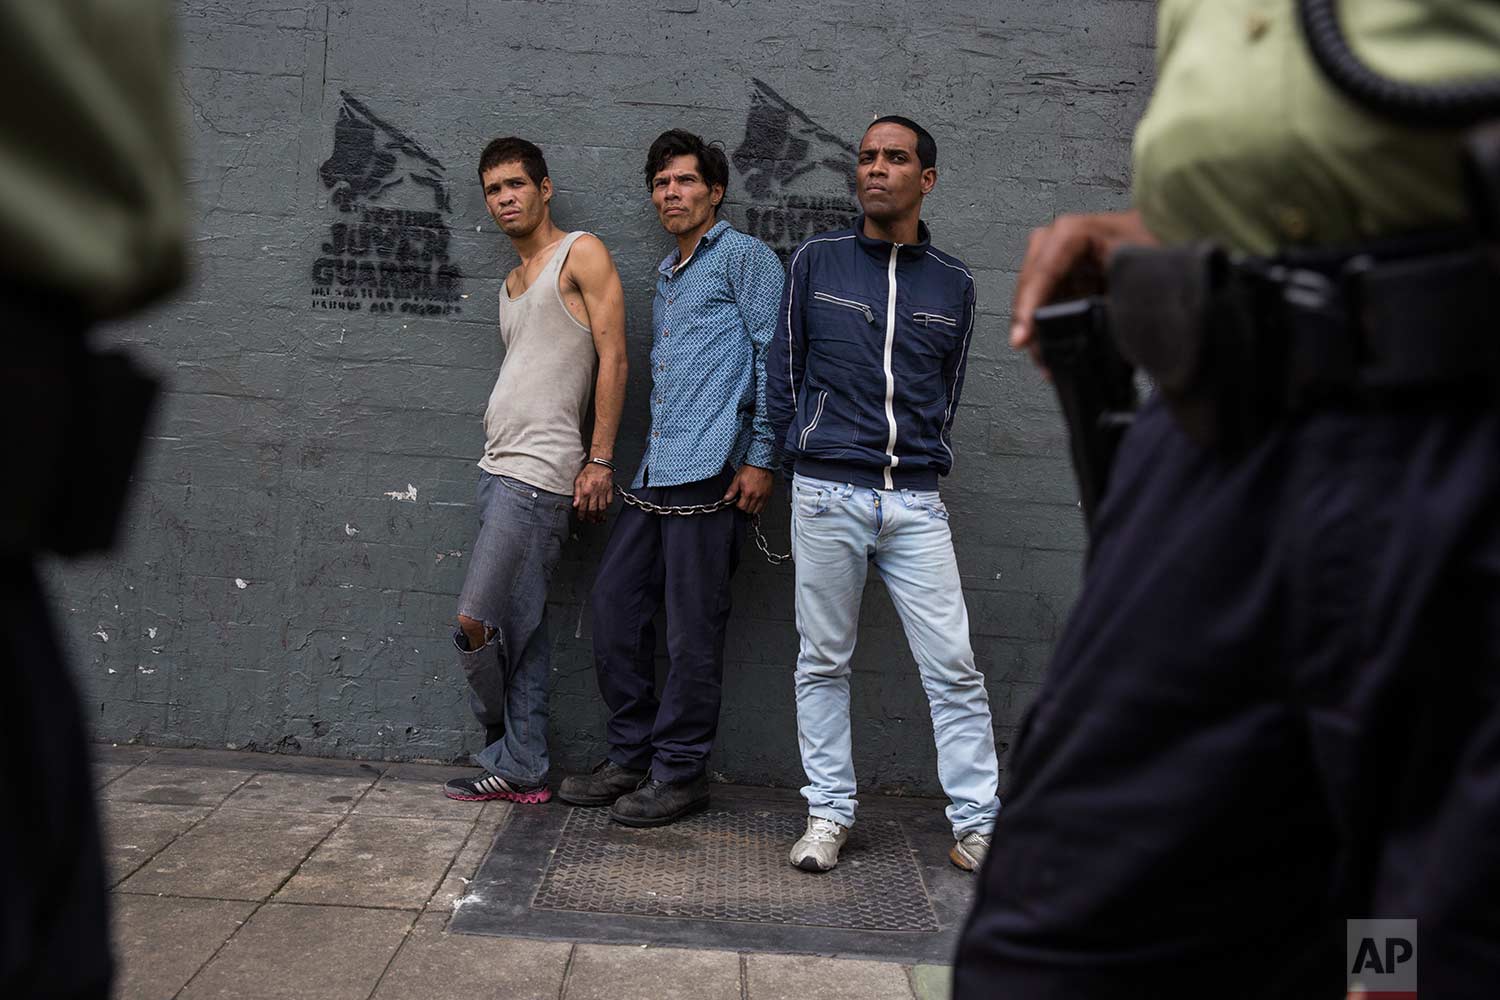  Suspected thieves chained together look at police after they were detained in downtown in Caracas, Venezuela, Wednesday, Oct. 25, 2017. (AP Photo/Rodrigo Abd) 